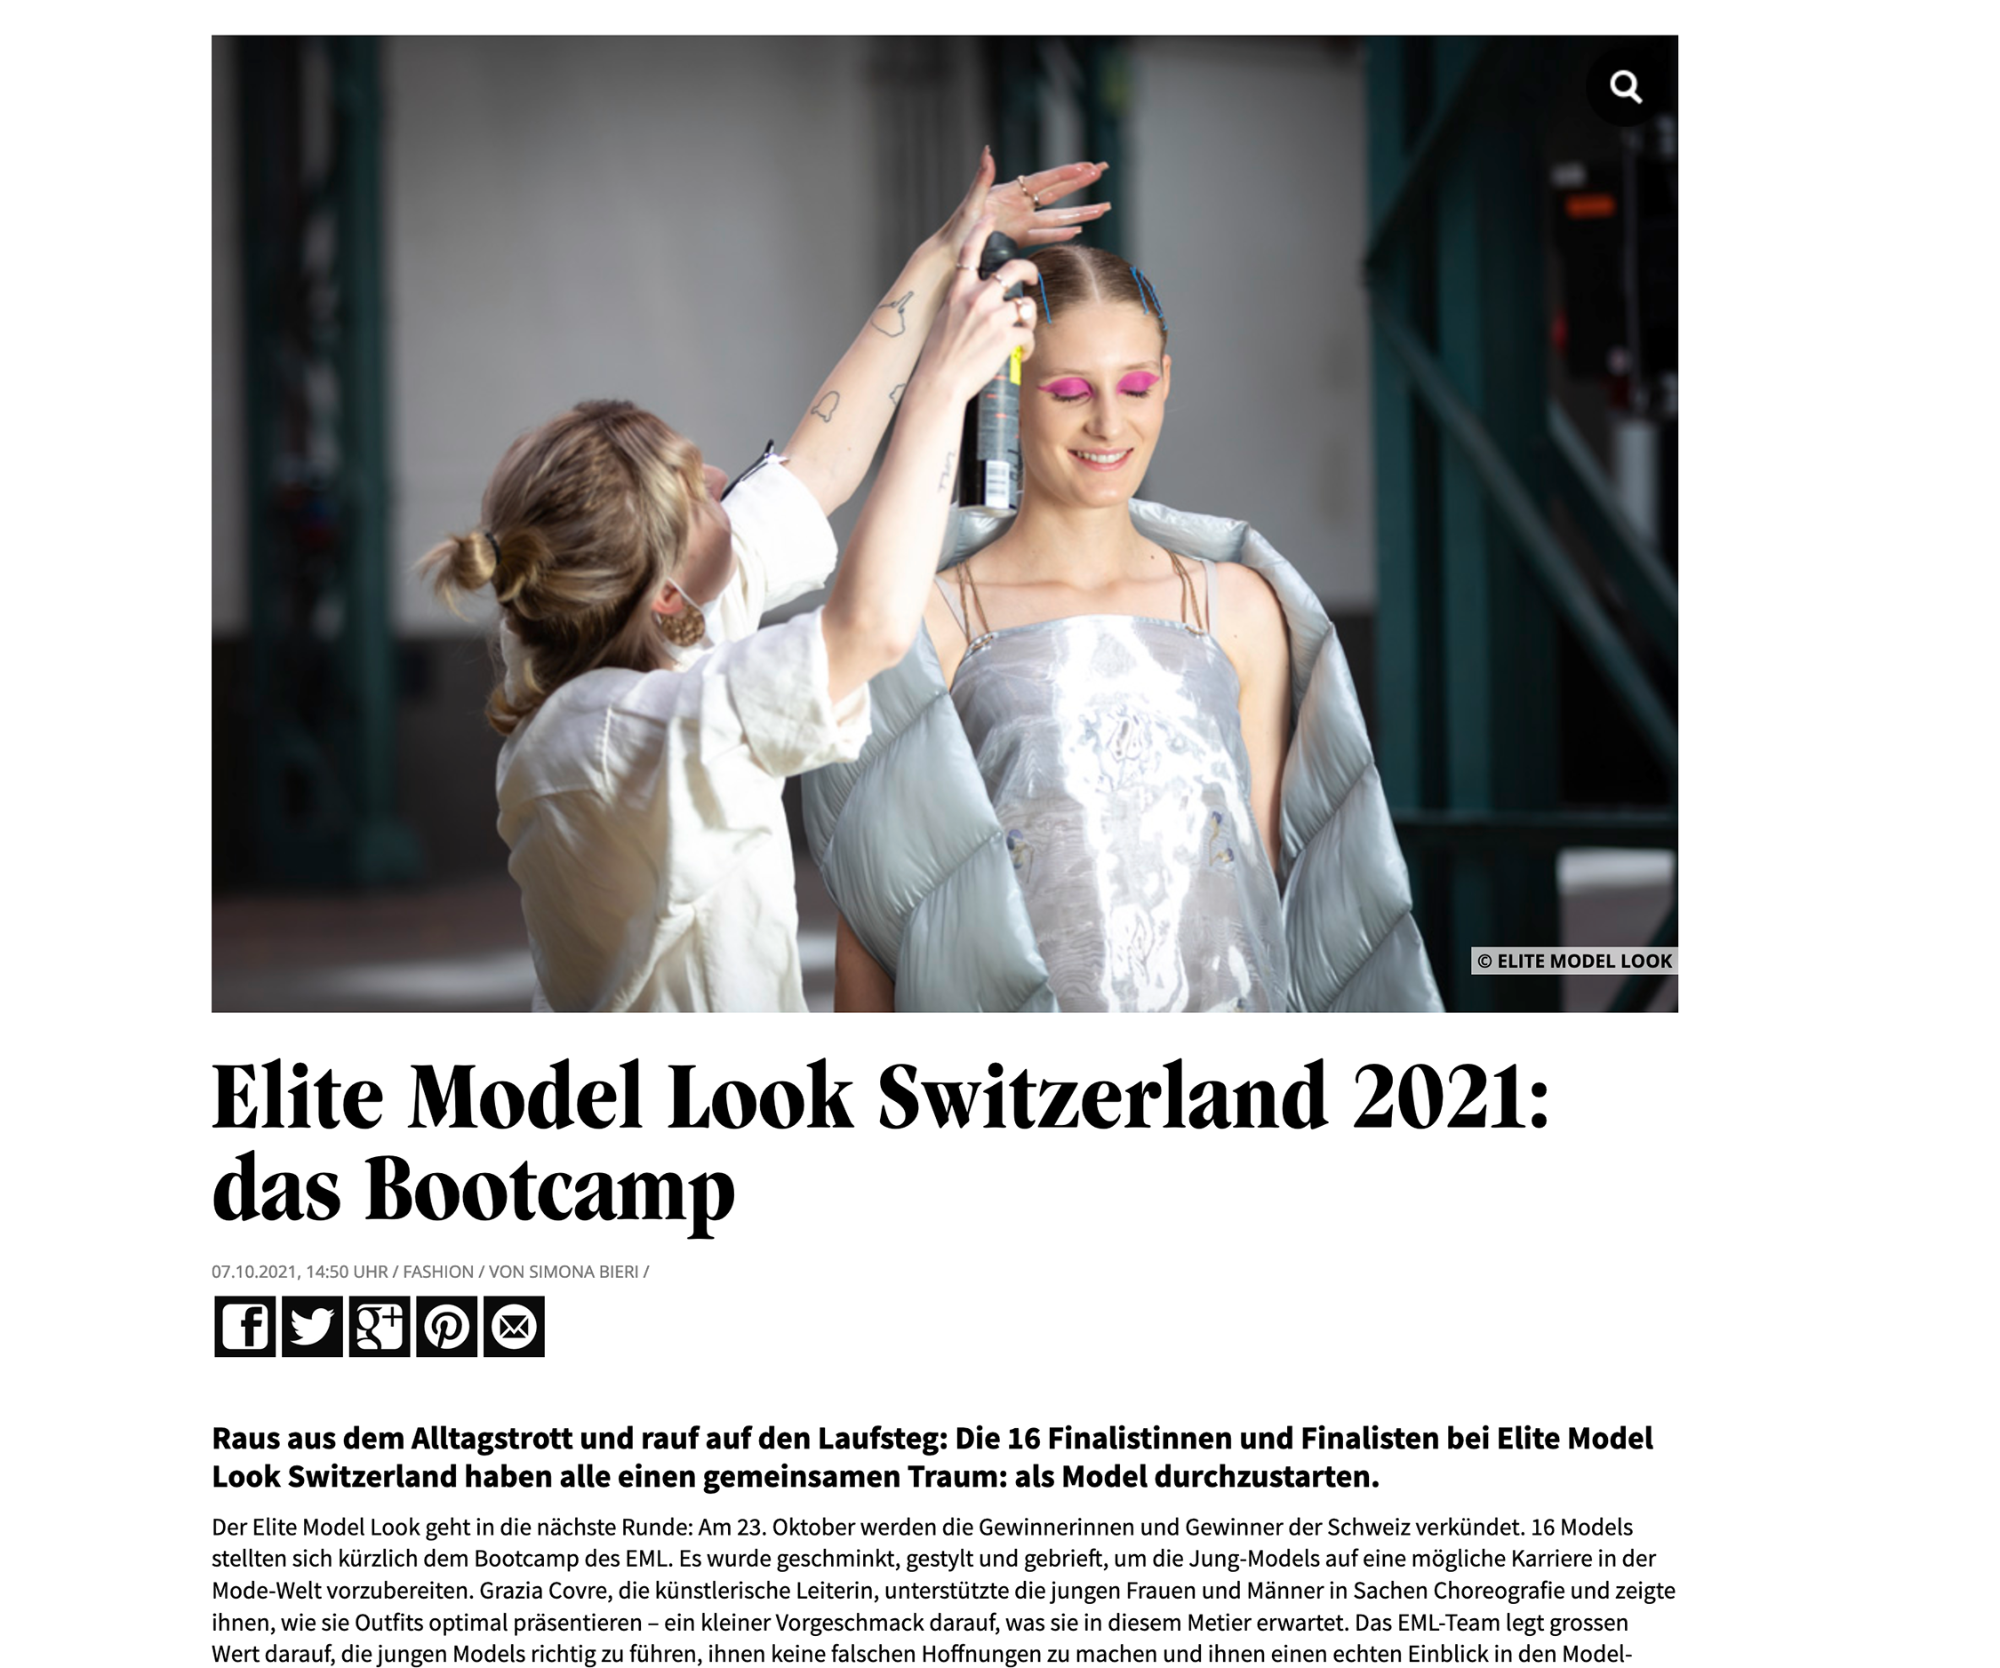 newspaper; stylist prepare hair of blonde model, photo and text